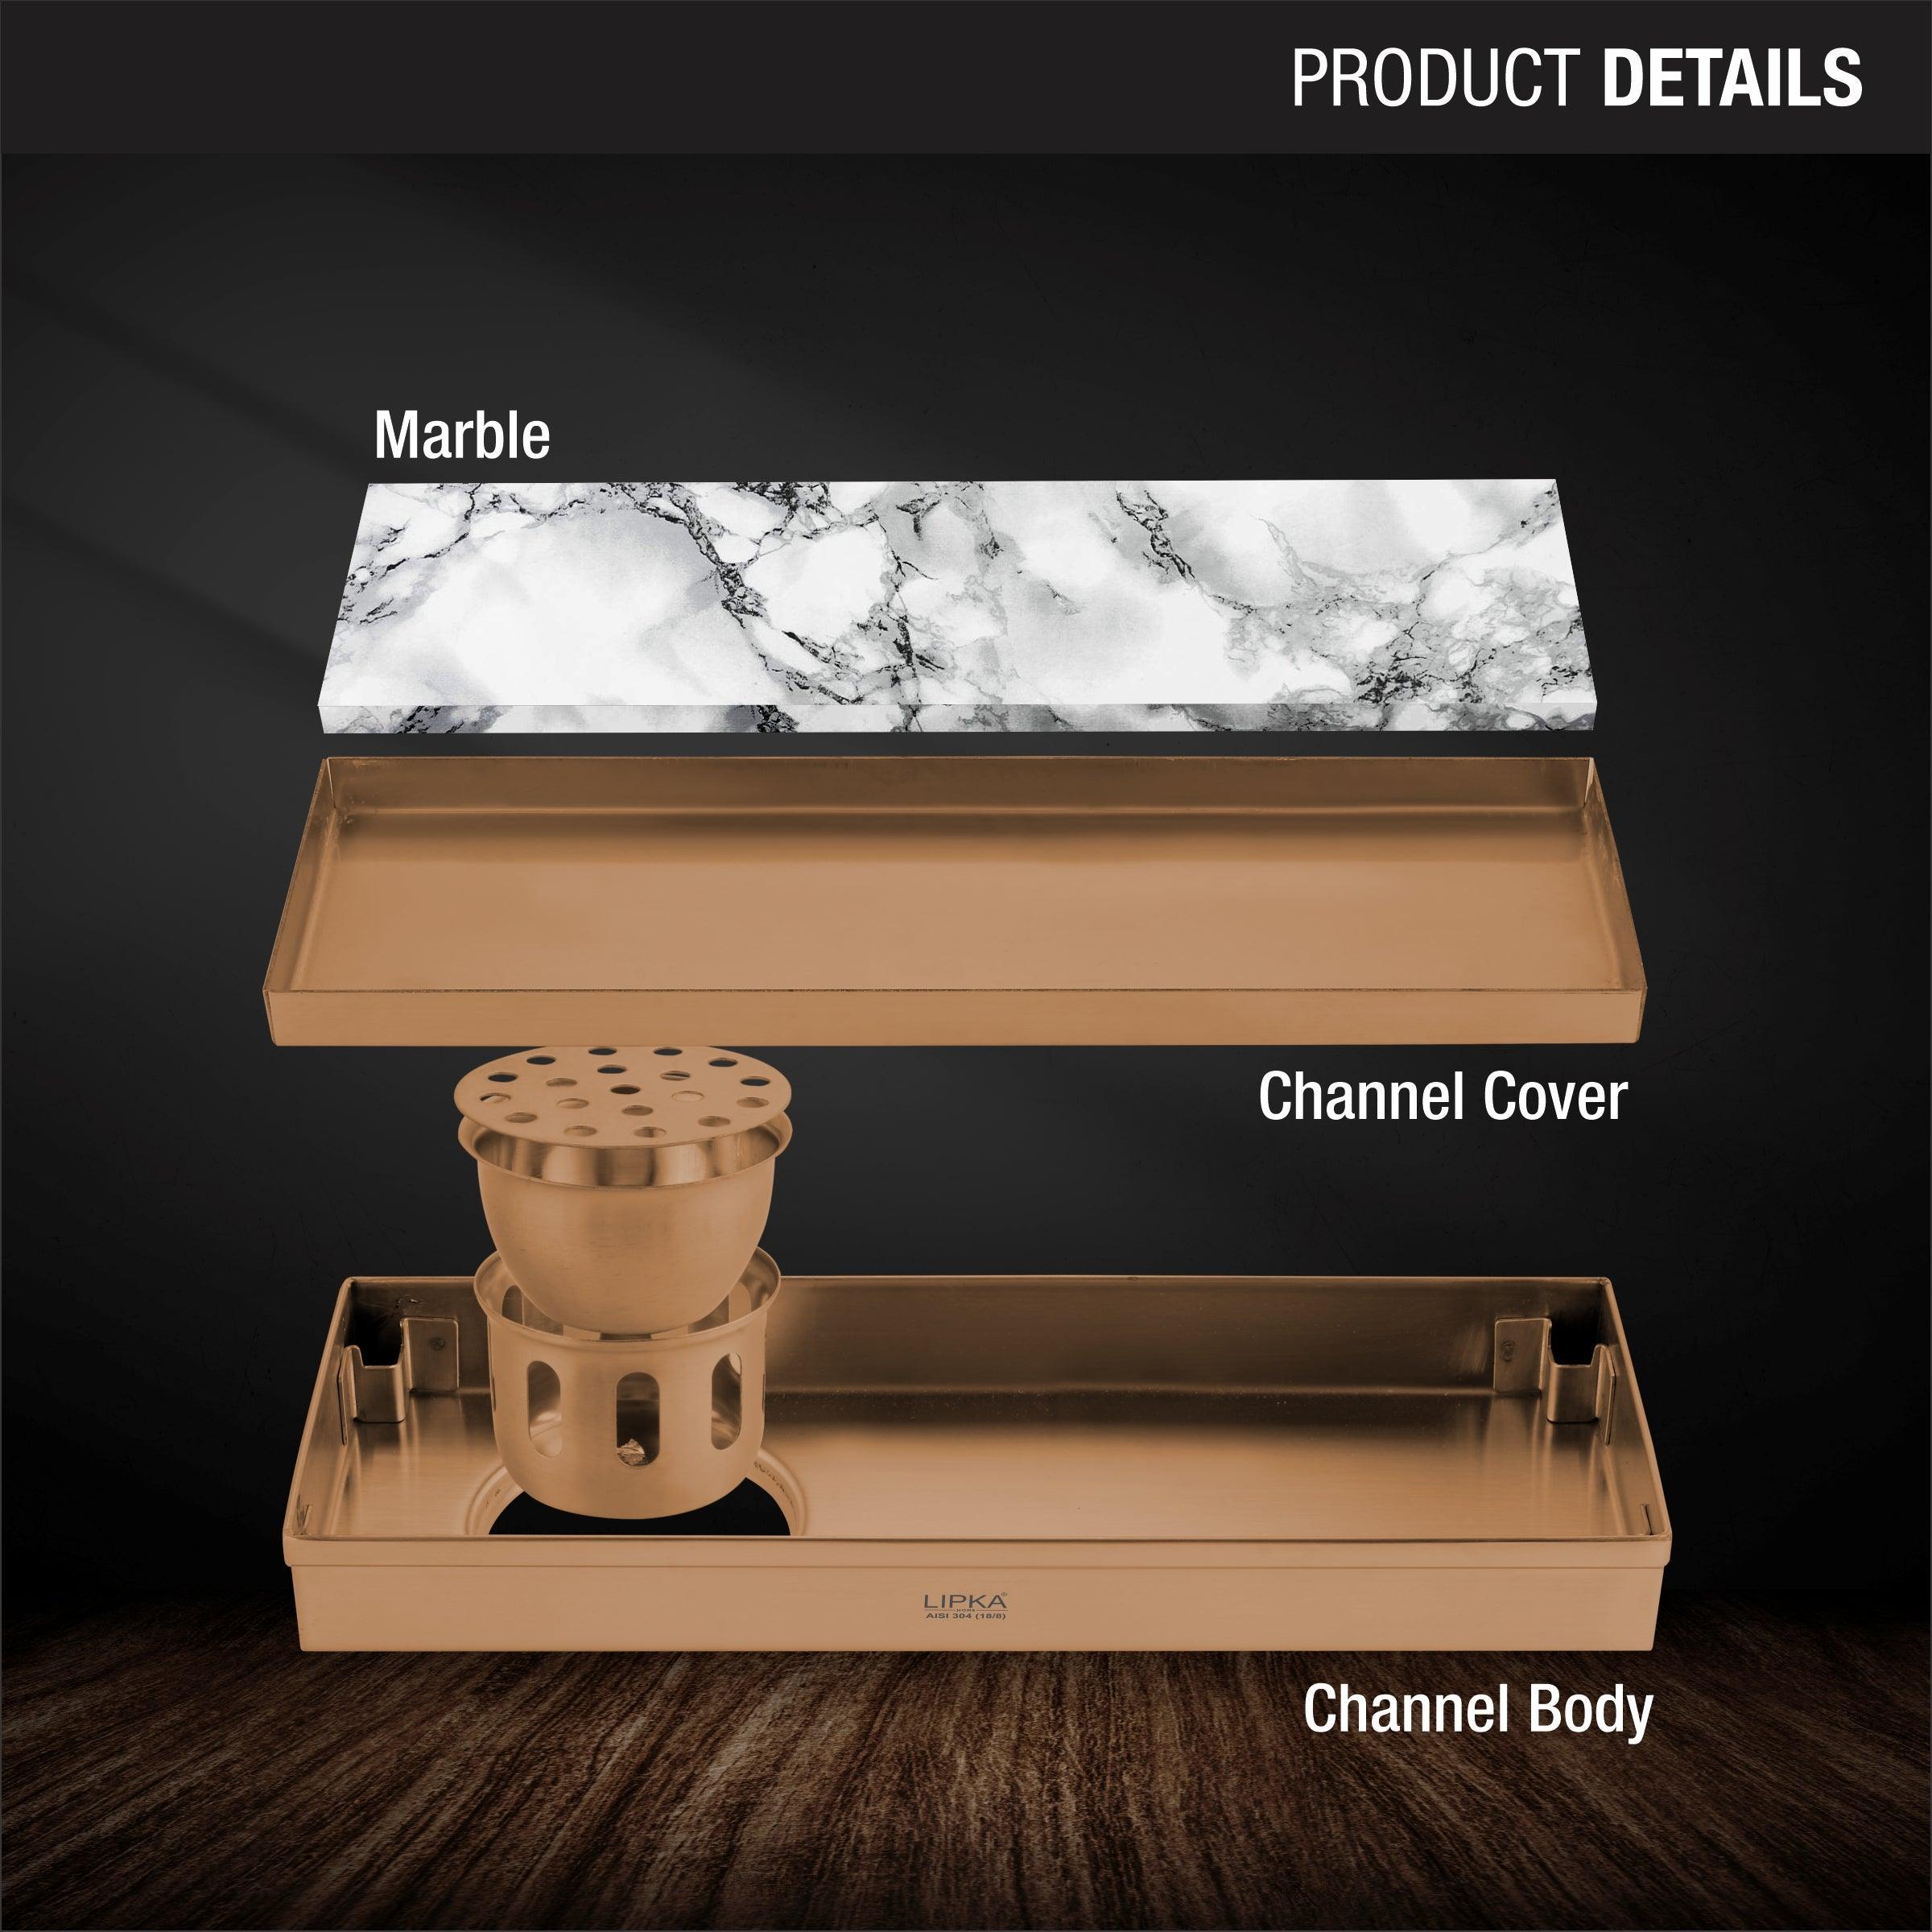 Marble Insert Shower Drain Channel - Antique Copper (12 x 5 Inches) product details